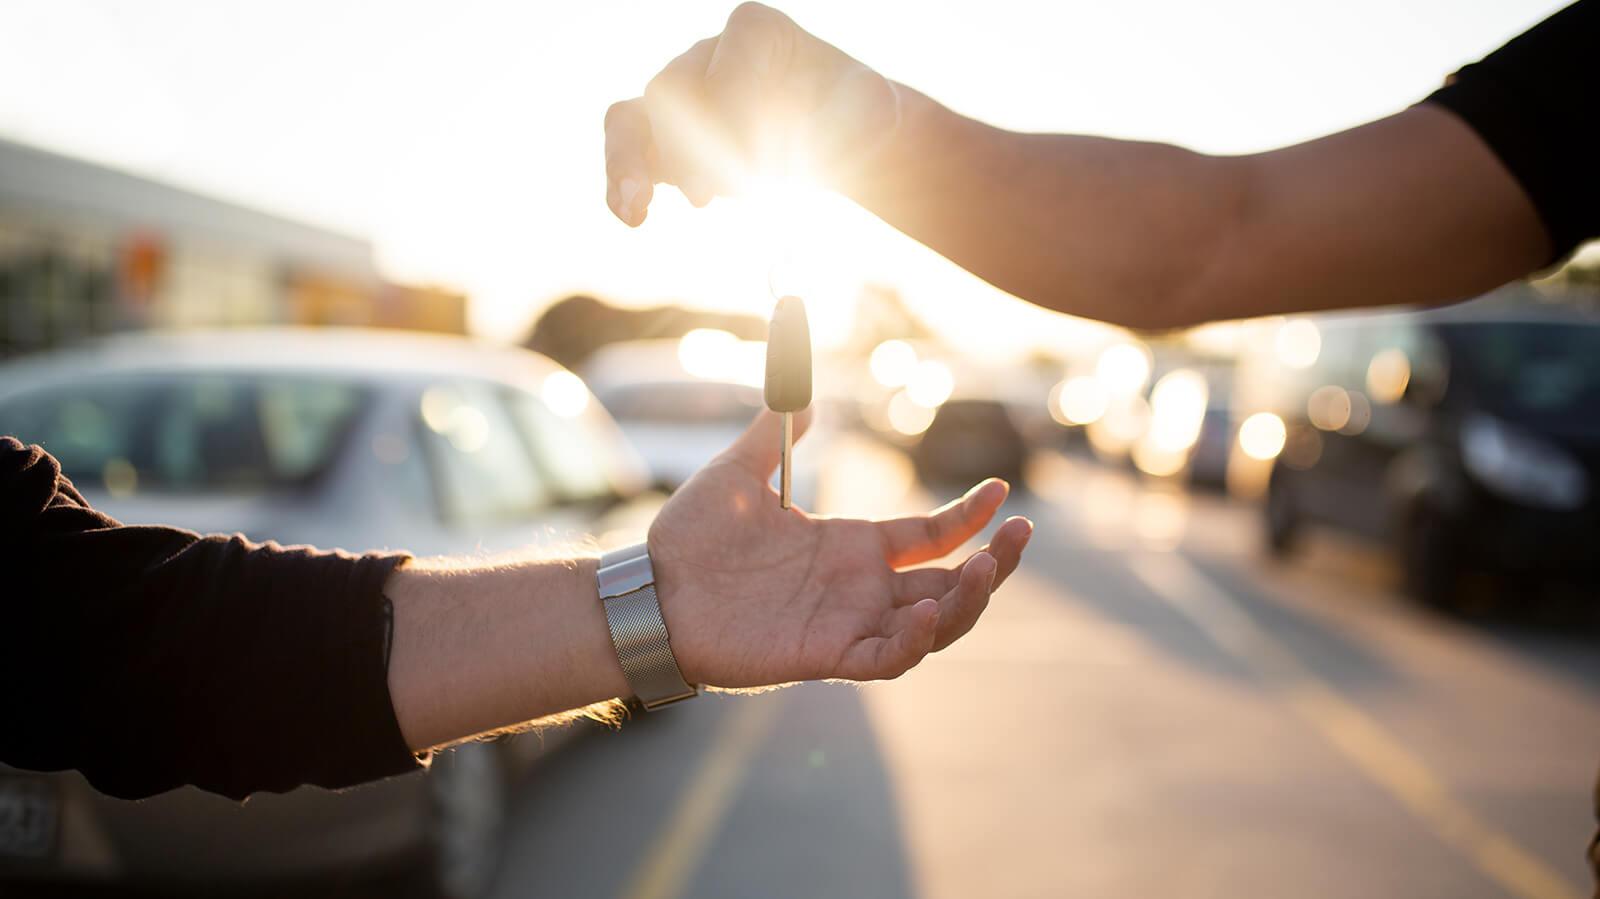 A man's hand giving a car key to another man's hand